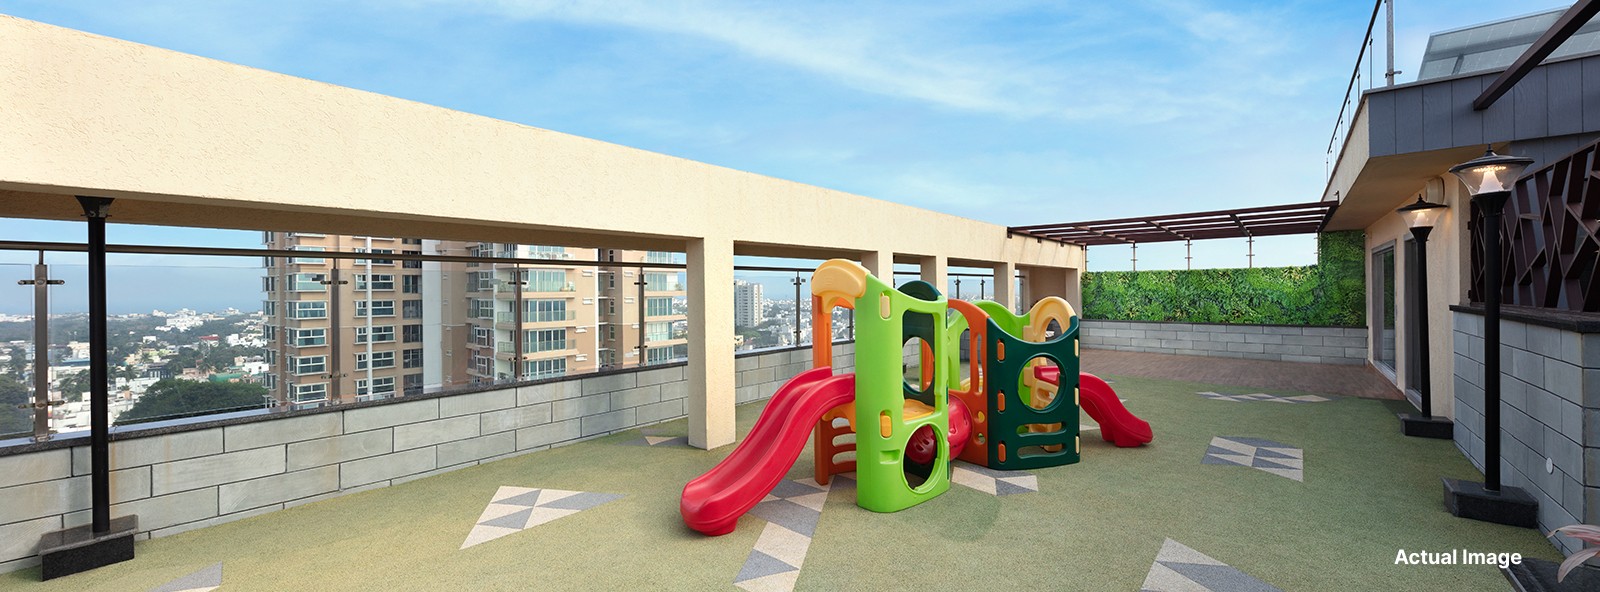 Kids' Play Area - Tower of Adyar - Nahar Group